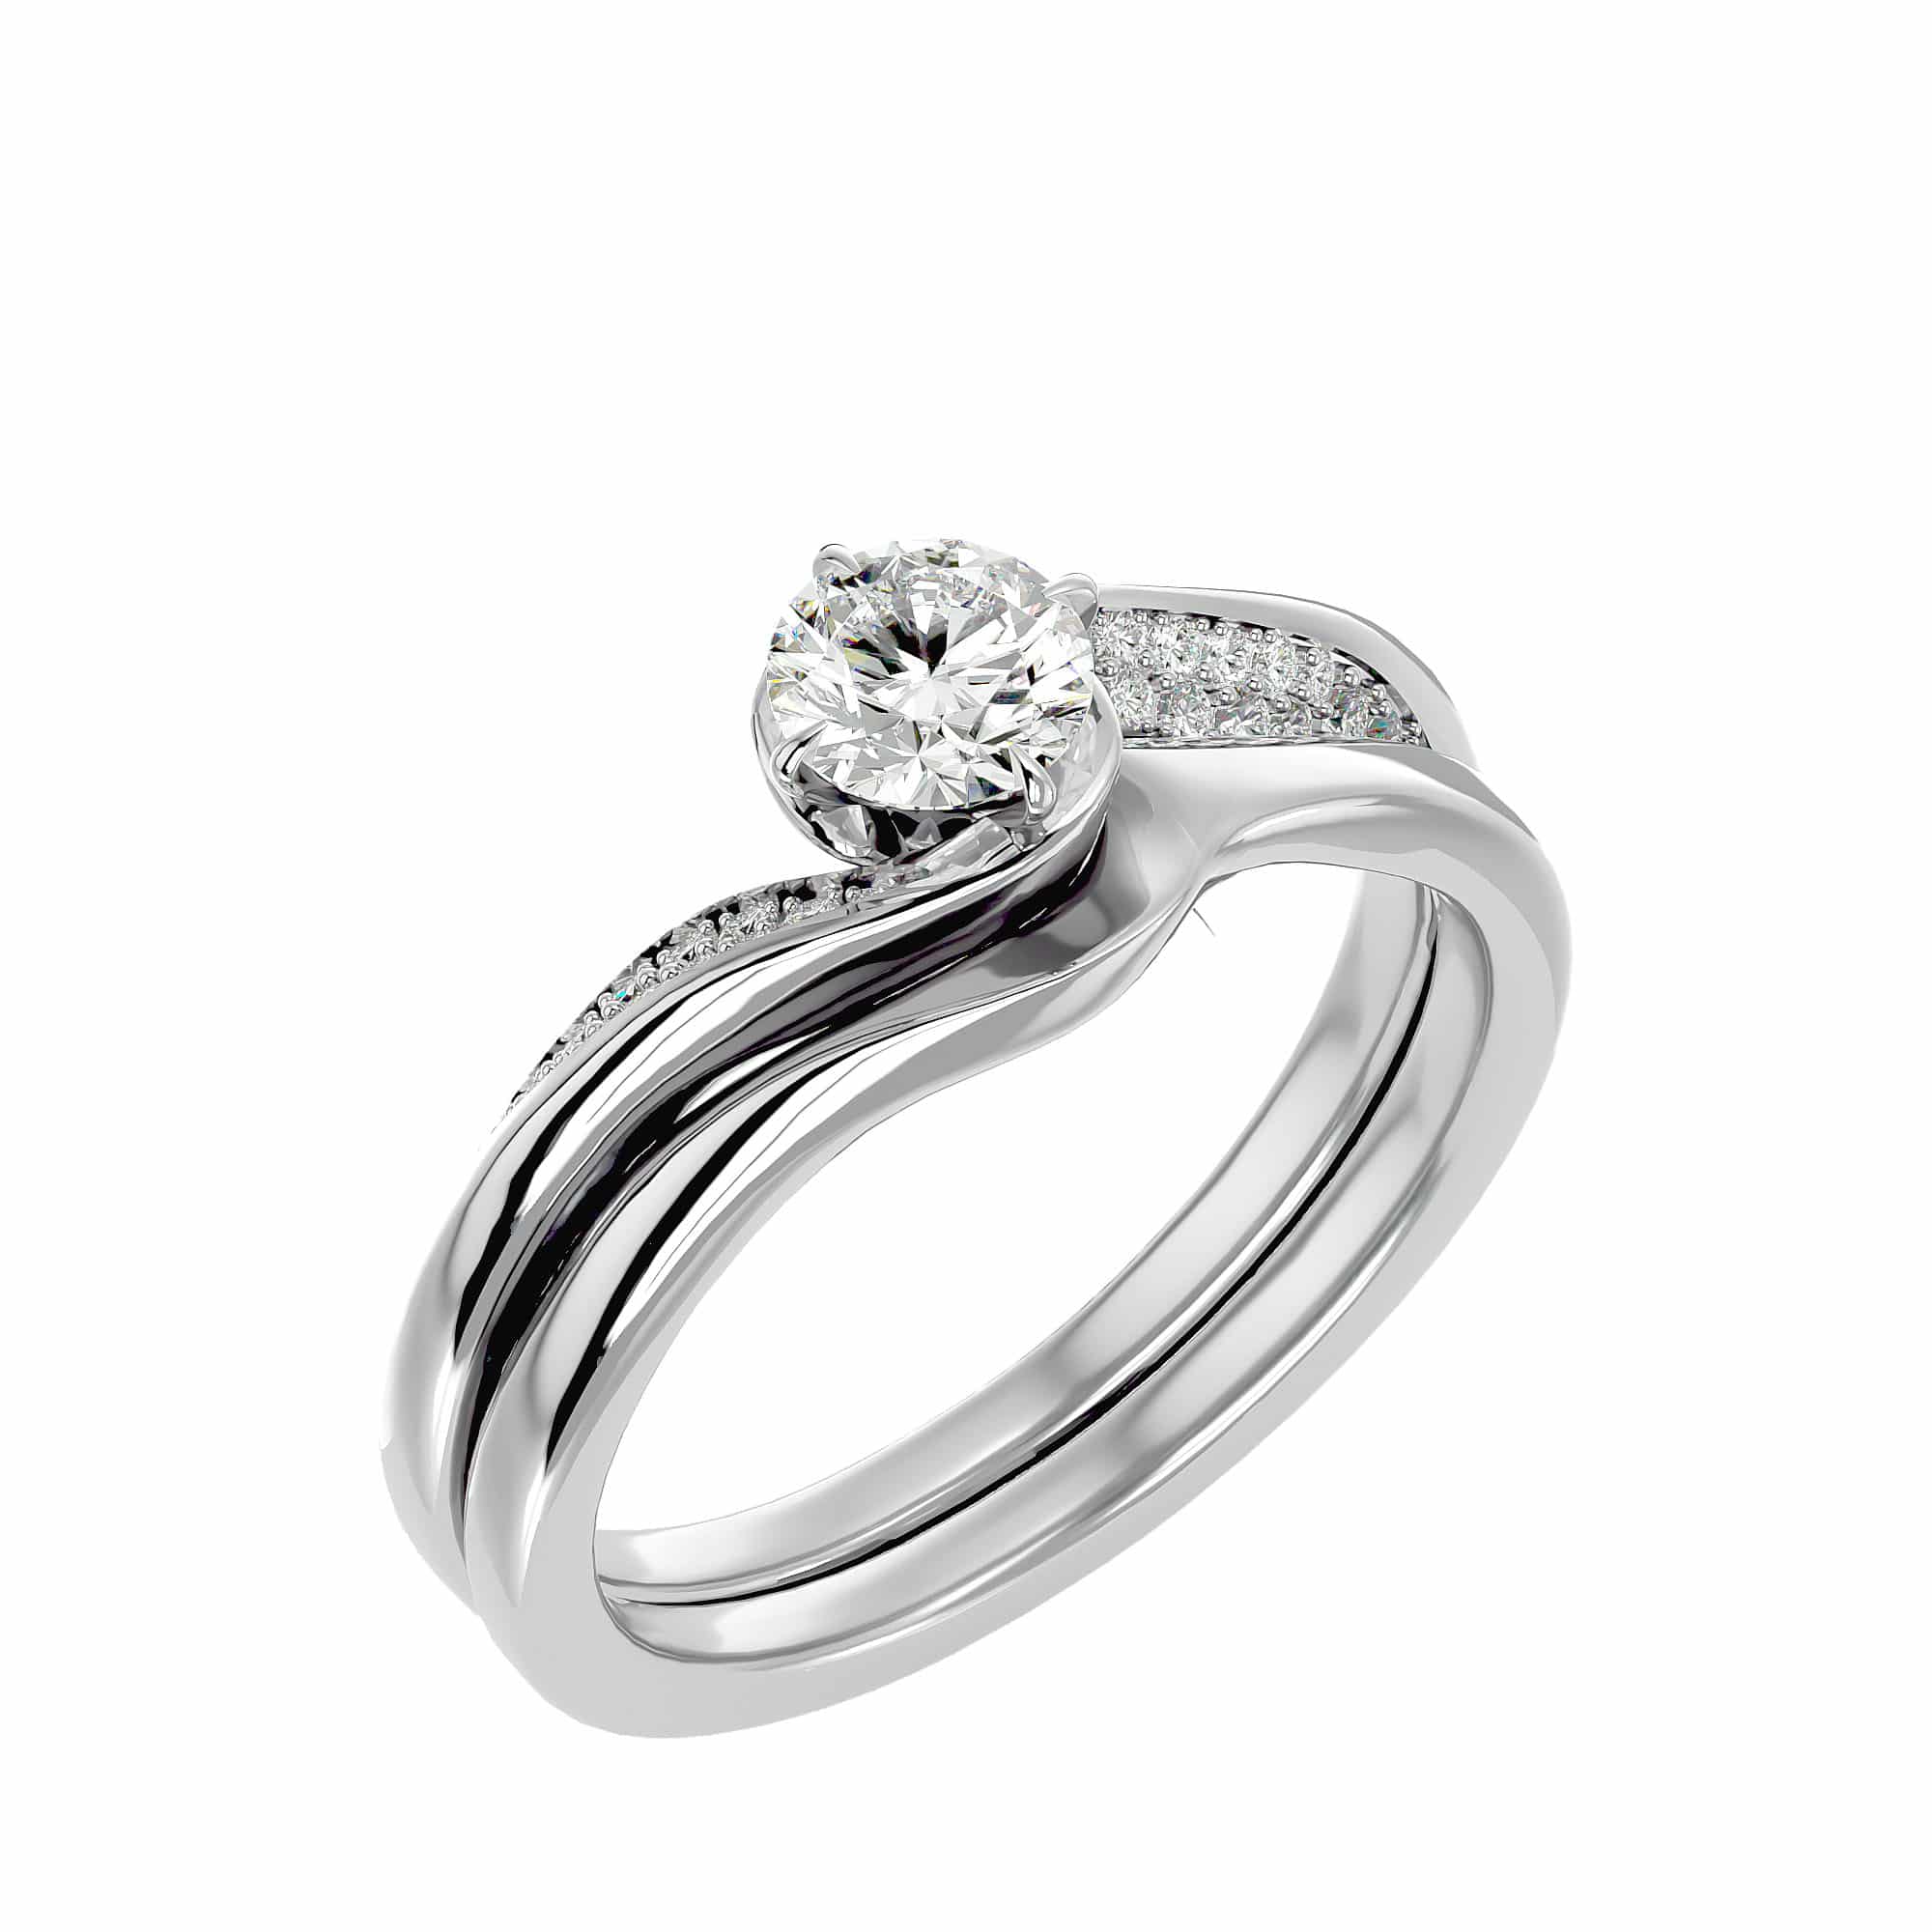 Solitaire Diamond Engagement Ring With Curled Matching Wedding Band